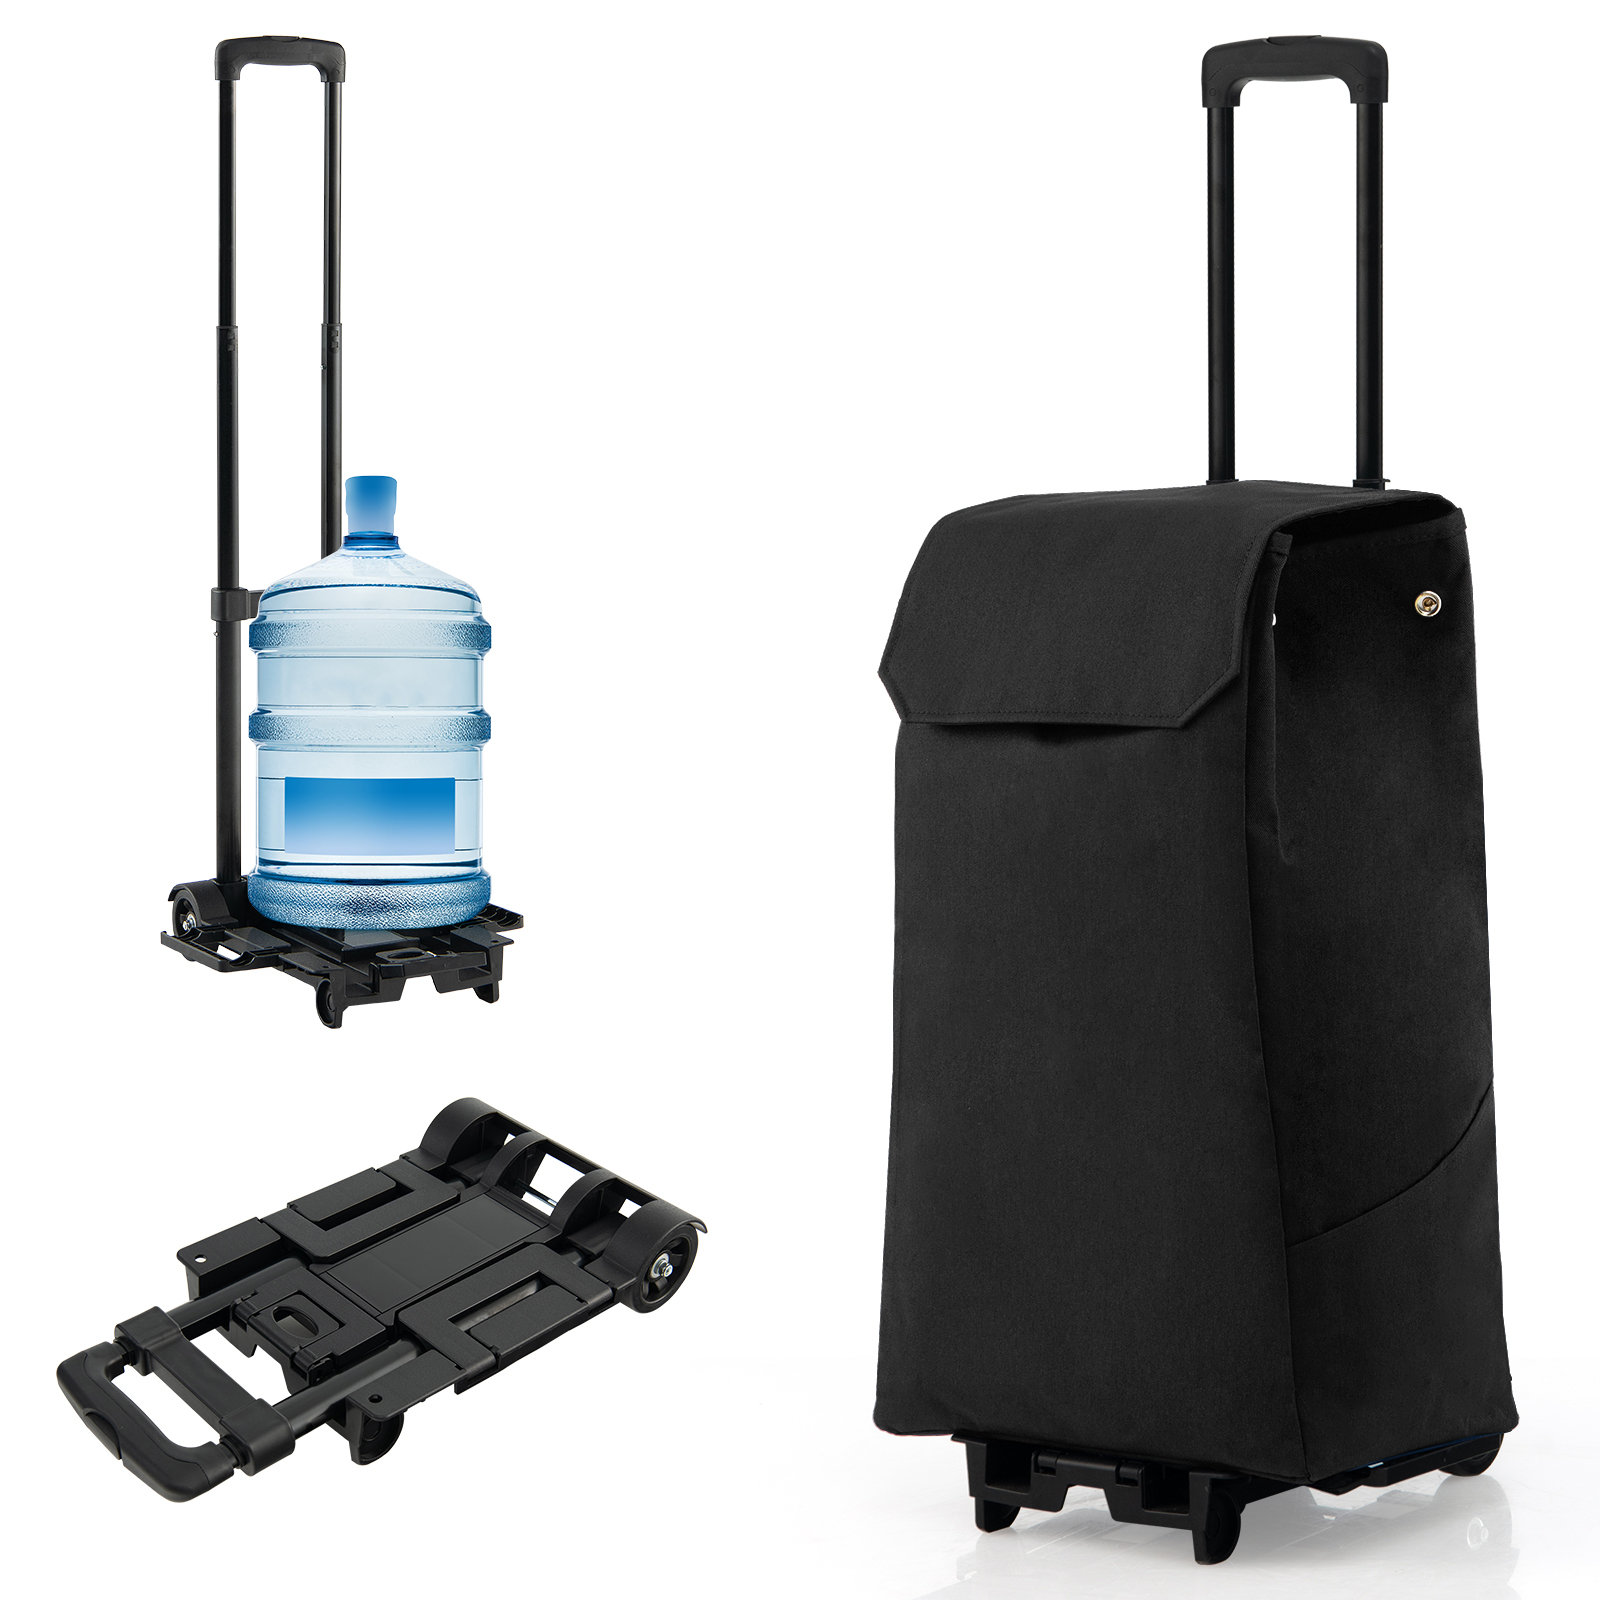 Folding Short-haul Travel Bag with Trolley and Telescopic Handle  Lightweight, Waterproof Oxford Cloth with Large Capacity